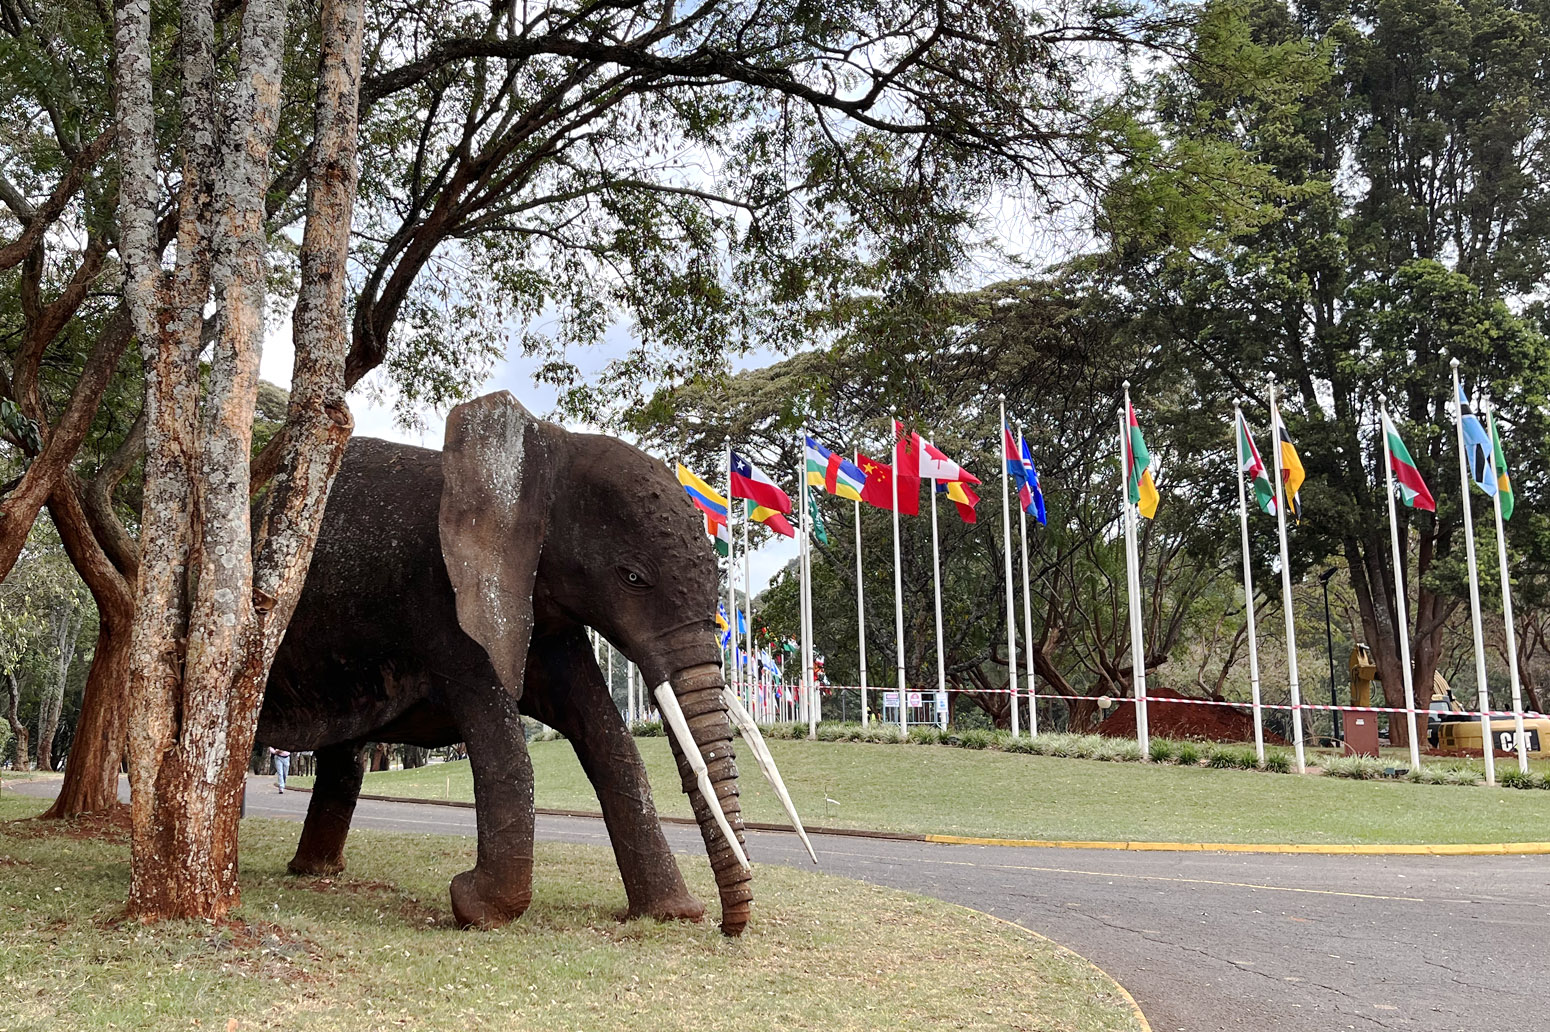 The elephant sculpture outside the negotiation rooms in the UNEP complex in Nairobi. Credit: Aruna Chandrasekhar (2022)